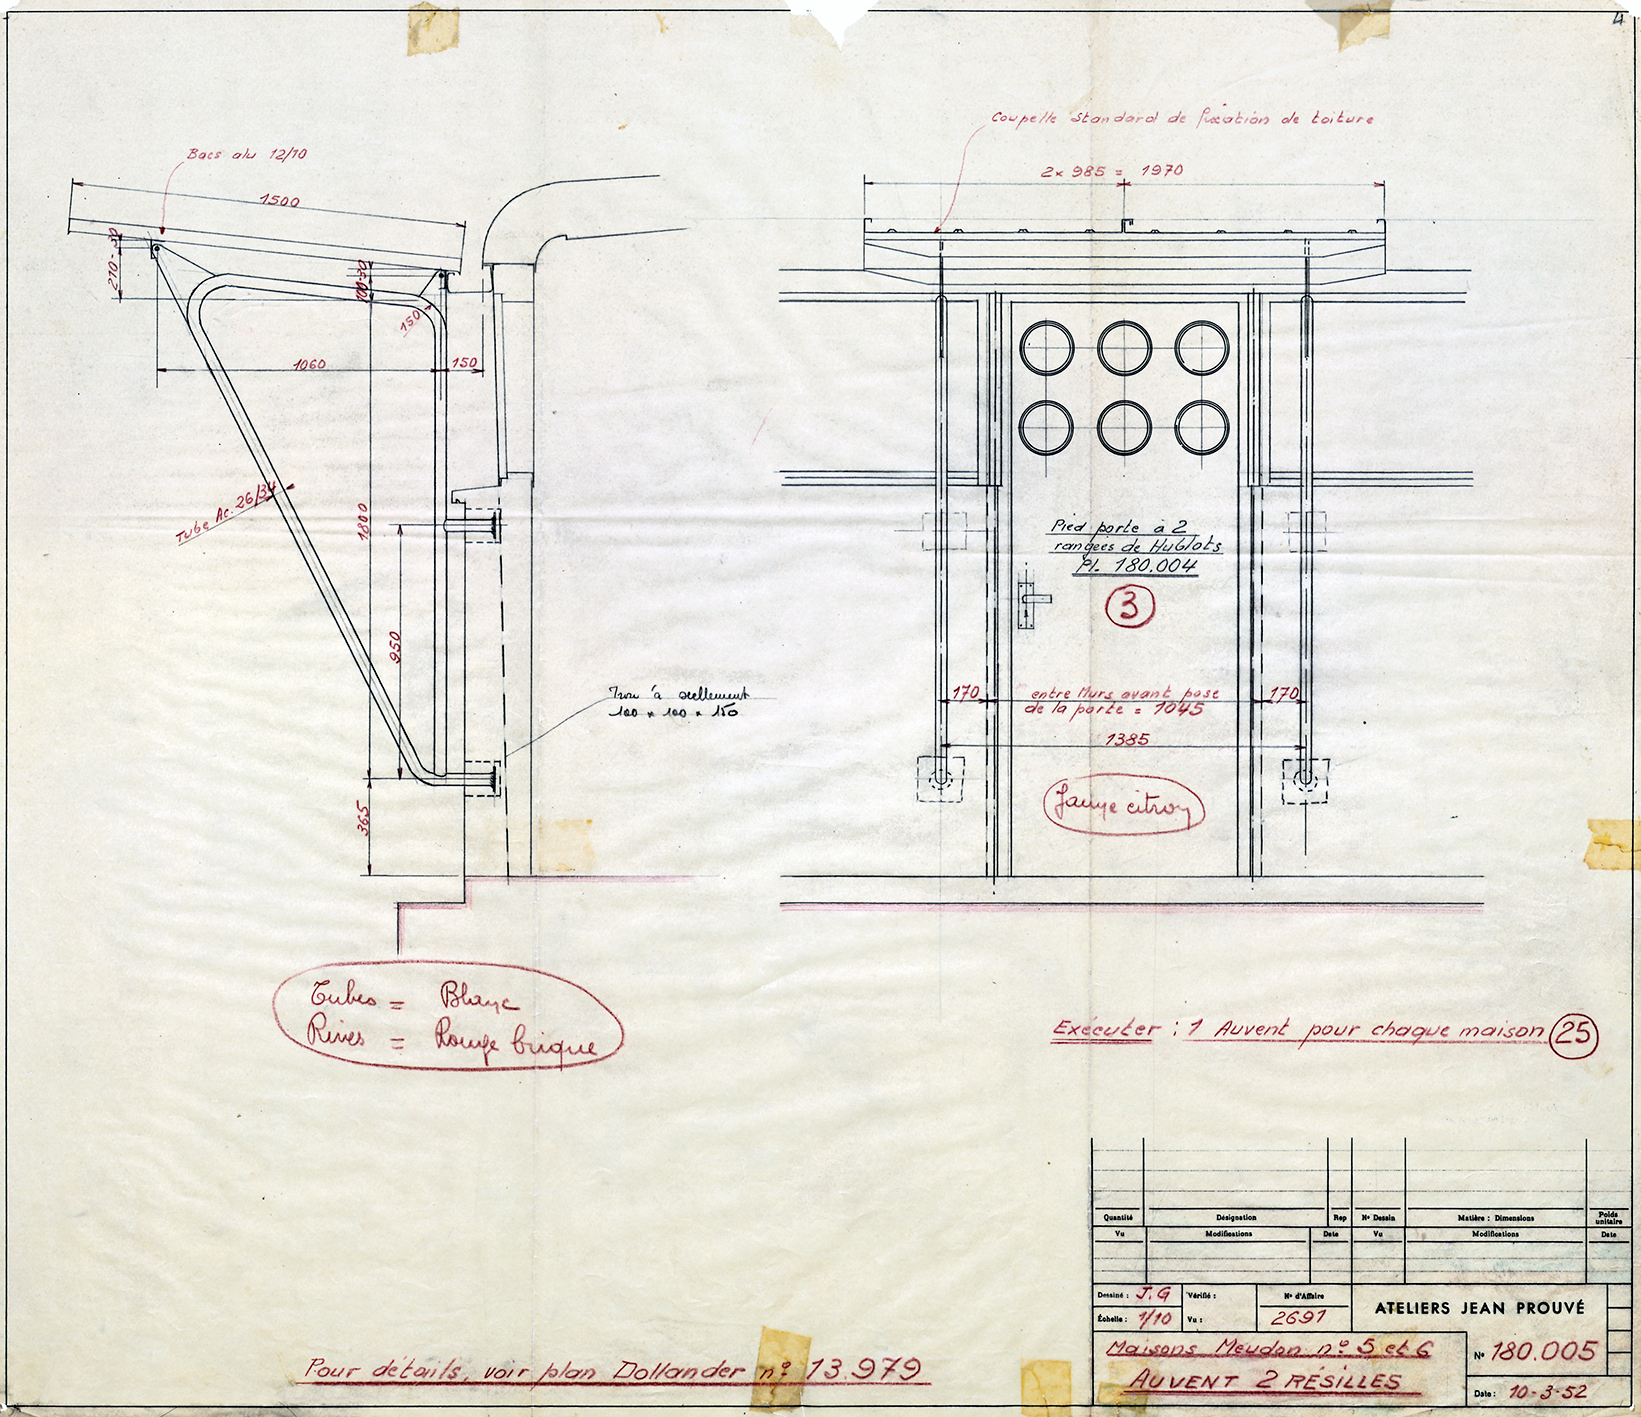 Ateliers Jean Prouvé. “Meudon houses nos. 5 and 6. Double grid awning”. Awning, porthole door, and indications of component colors. Plan no. 180.005, 10 March 1952.